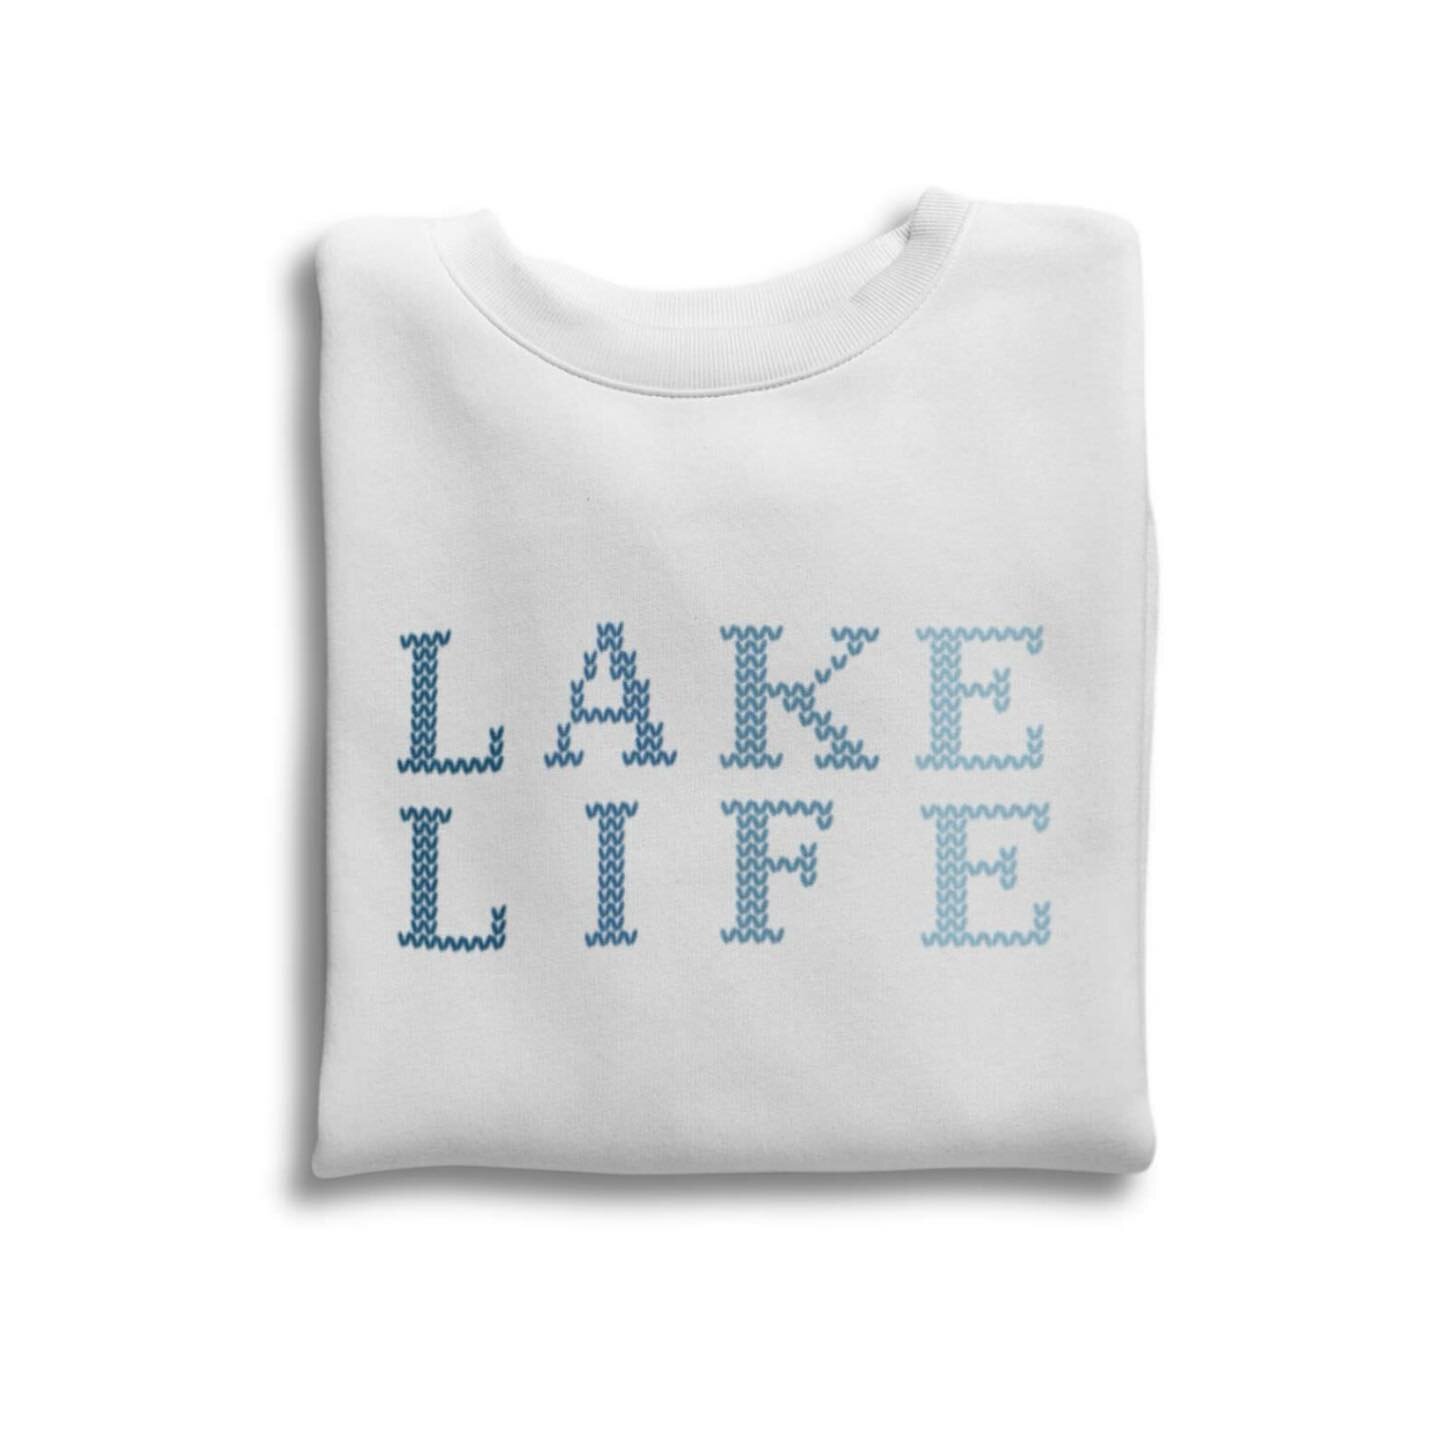 Cozy up in style! Check out our sweatshirts and hoodies today! ✨

#lakeminnetonka #lifeisbetteratthelake #lakelifeshop #shoplakelife #minnesota